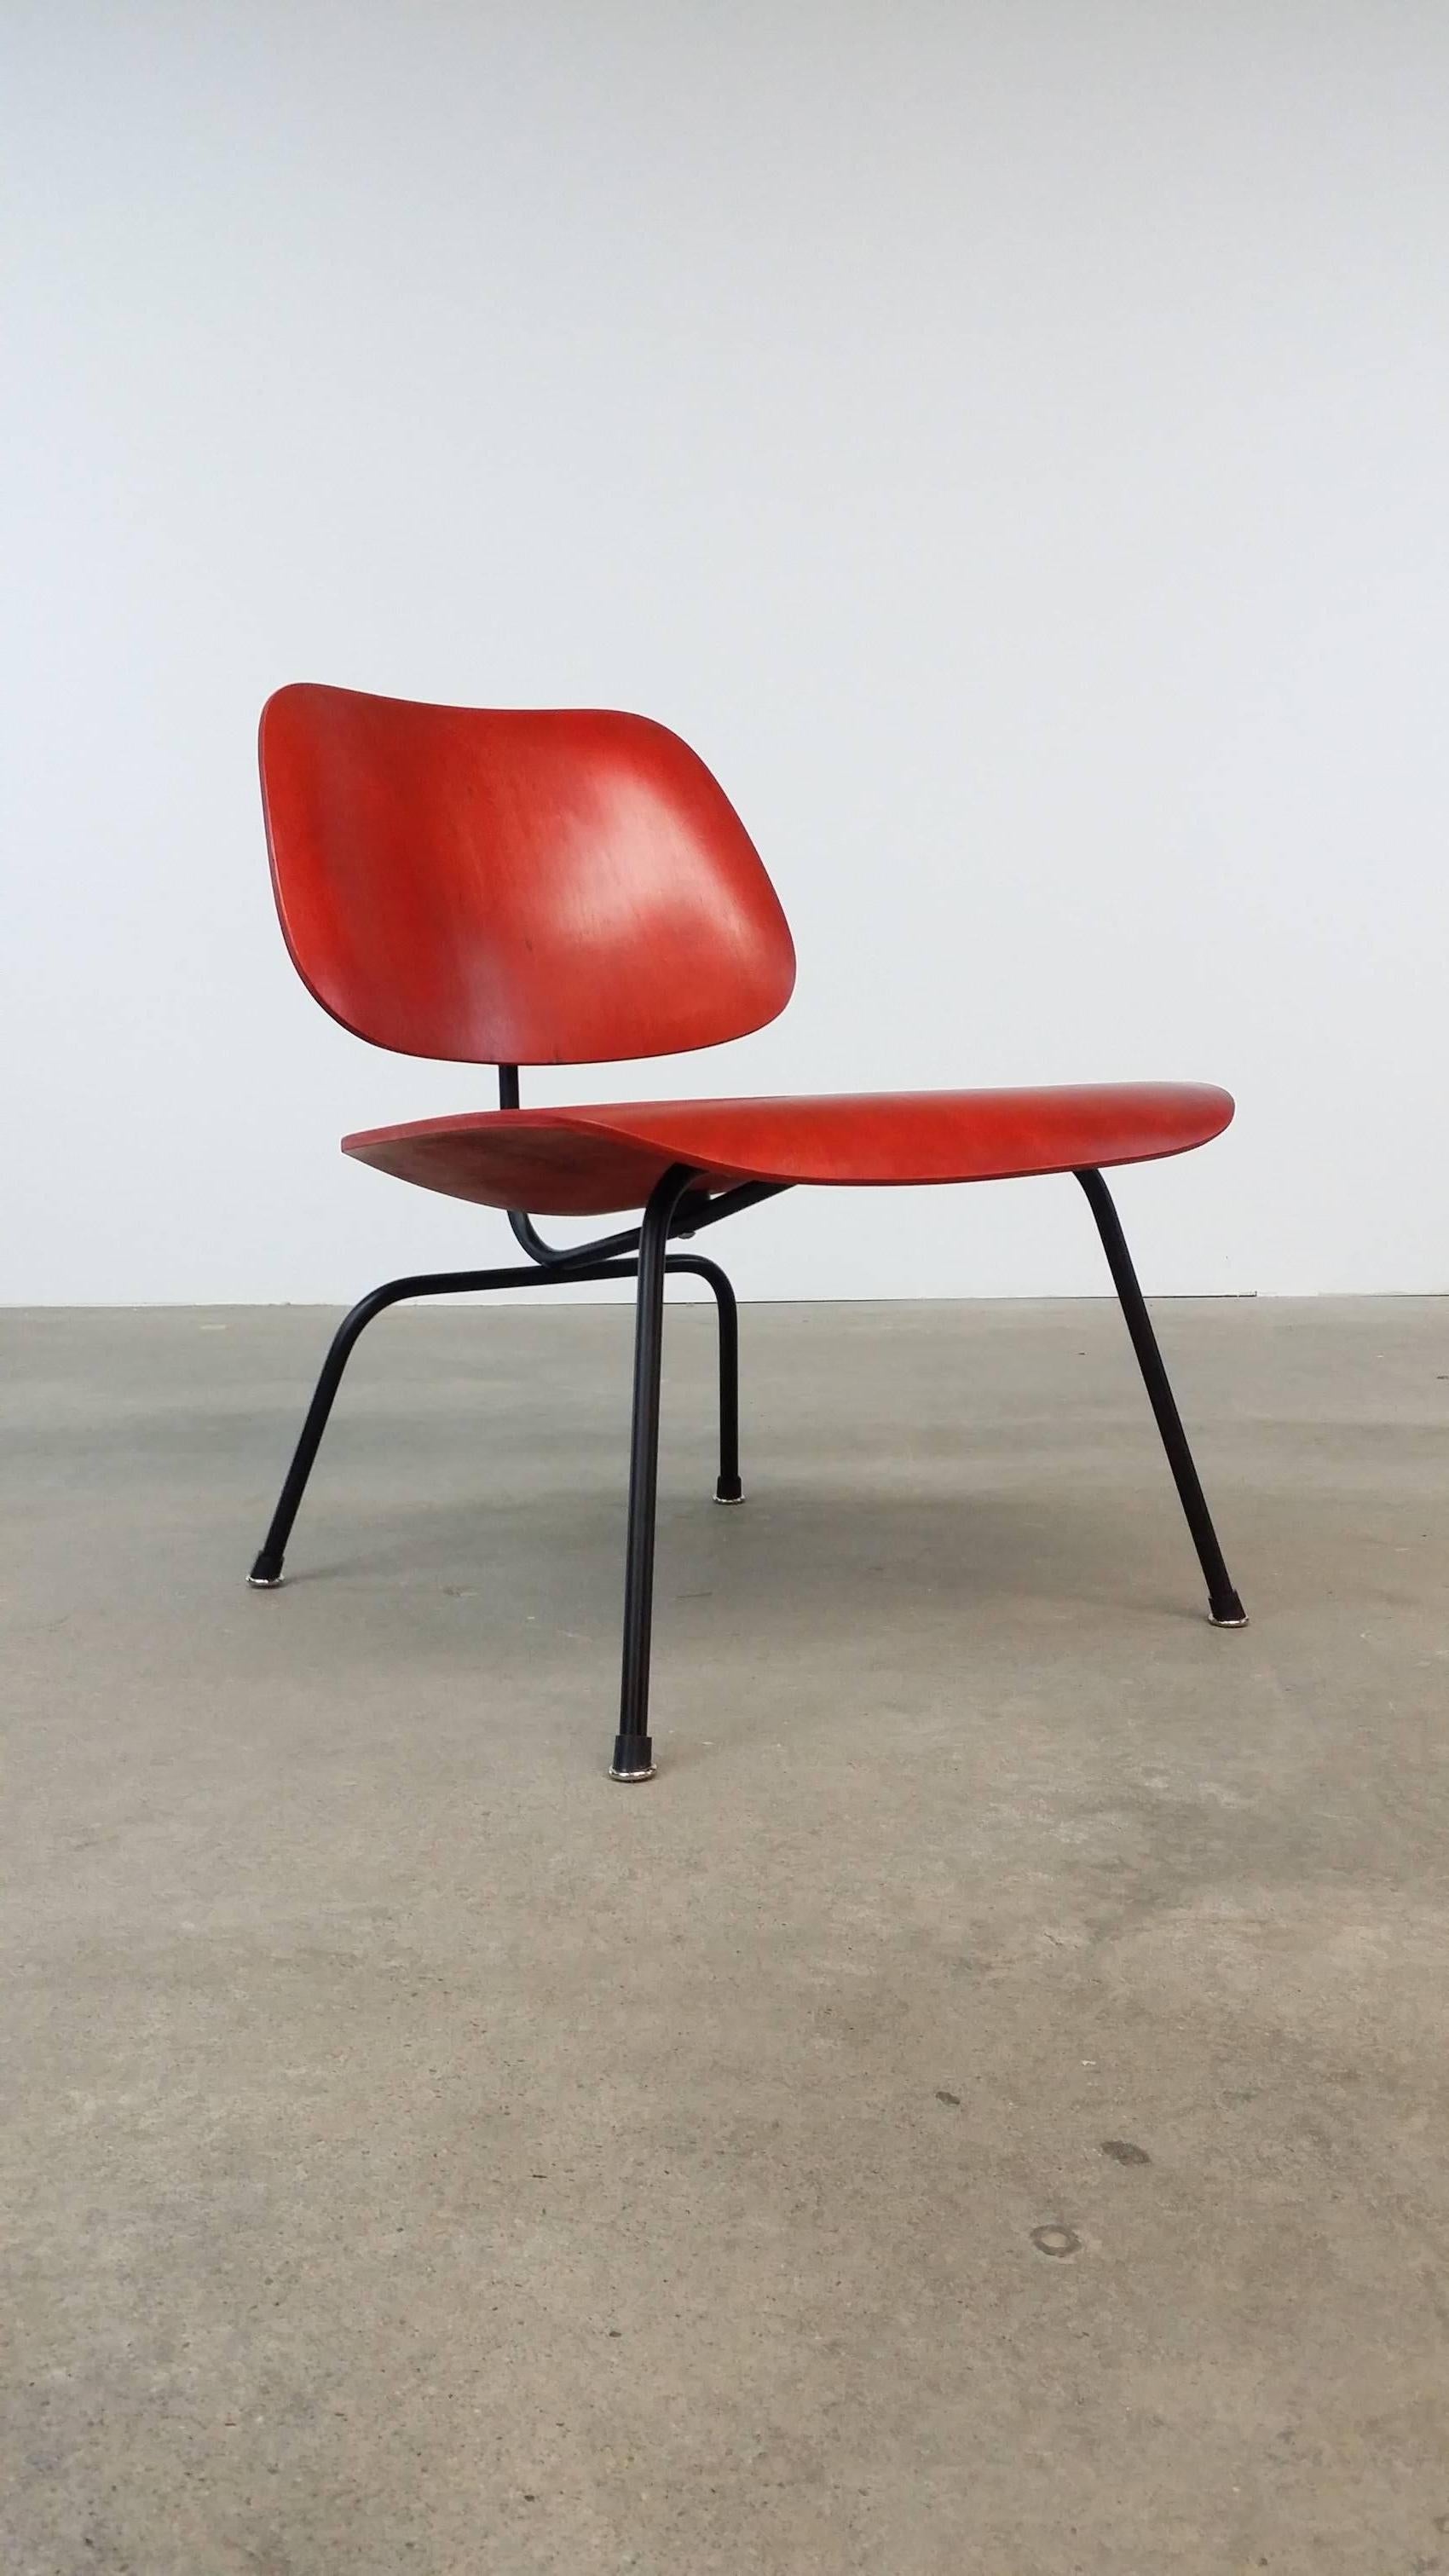 Fully restored first generation, Herman Miller LCM (Lounge Chair Metal) in aniline dye, designed by Charles Eames, circa 1946. This example, early 1950s. Chair has been fully restored.